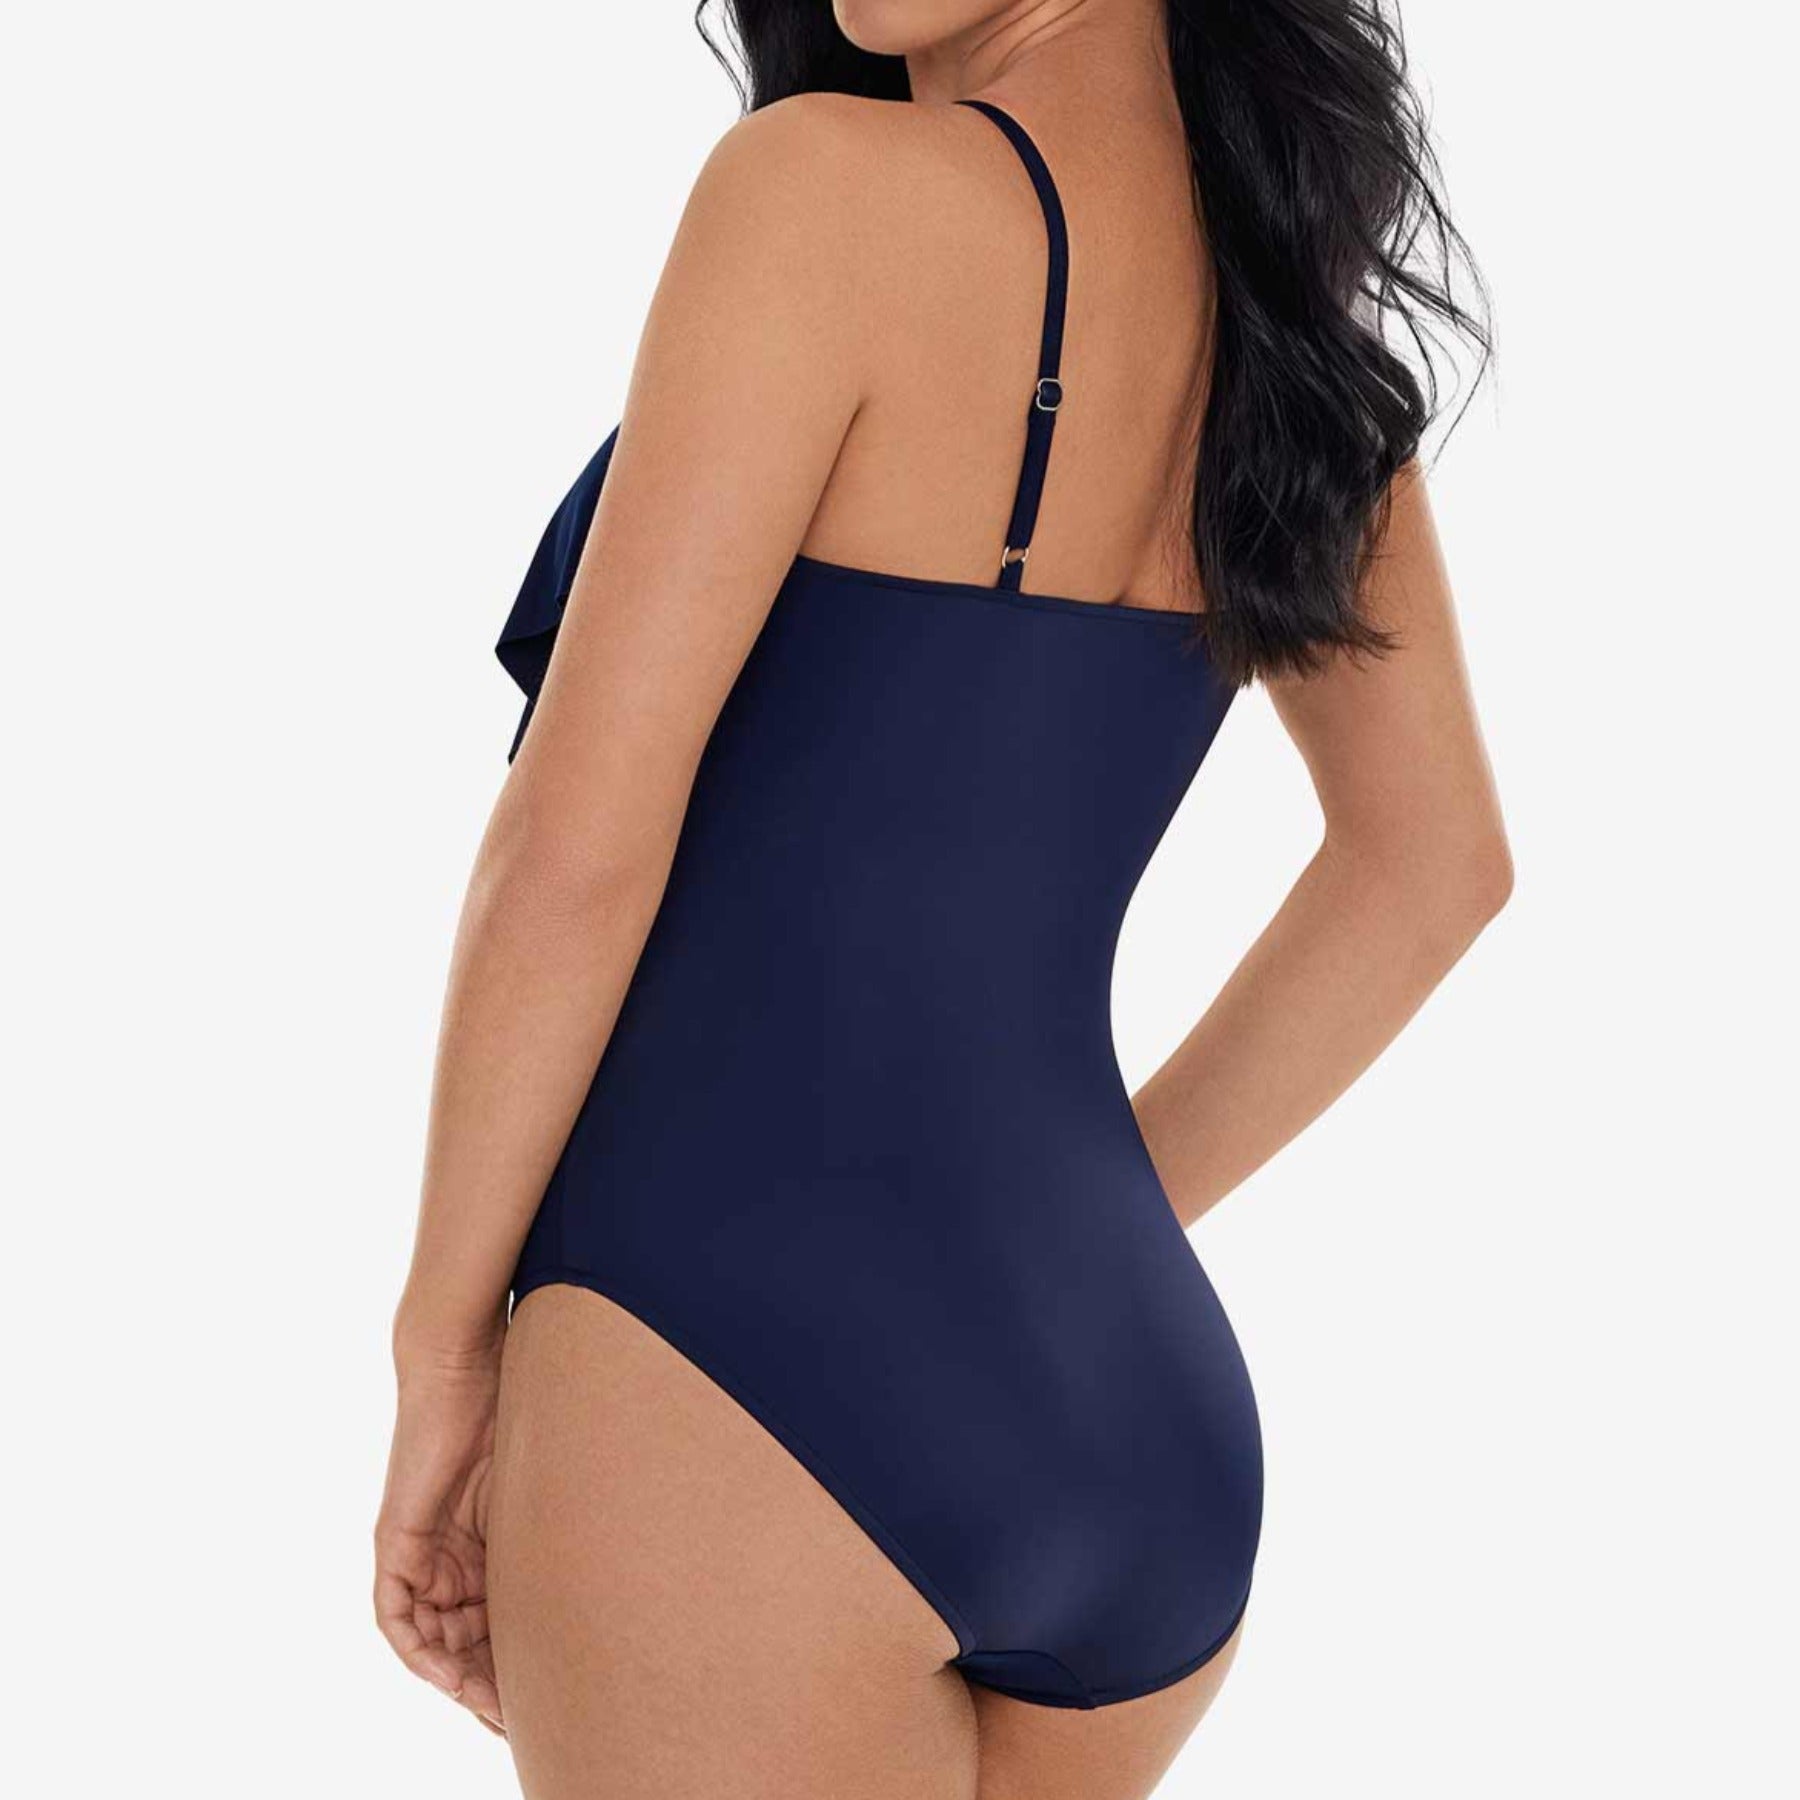 Isabel One Piece Swimsuit 6006018 - Navy Blue